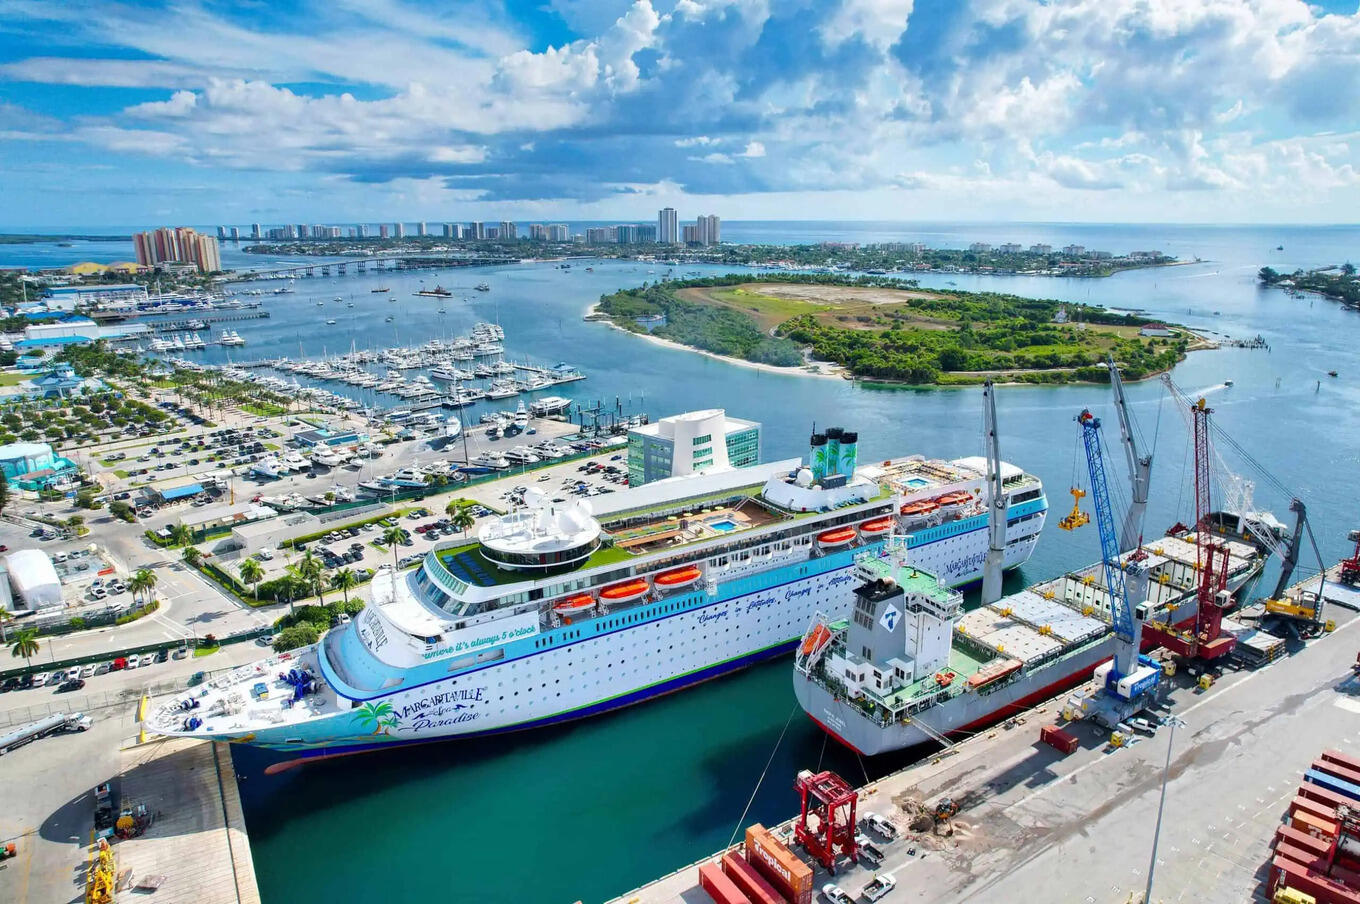 where-does-the-margaritaville-cruise-ship-dock-in-the-bahamas